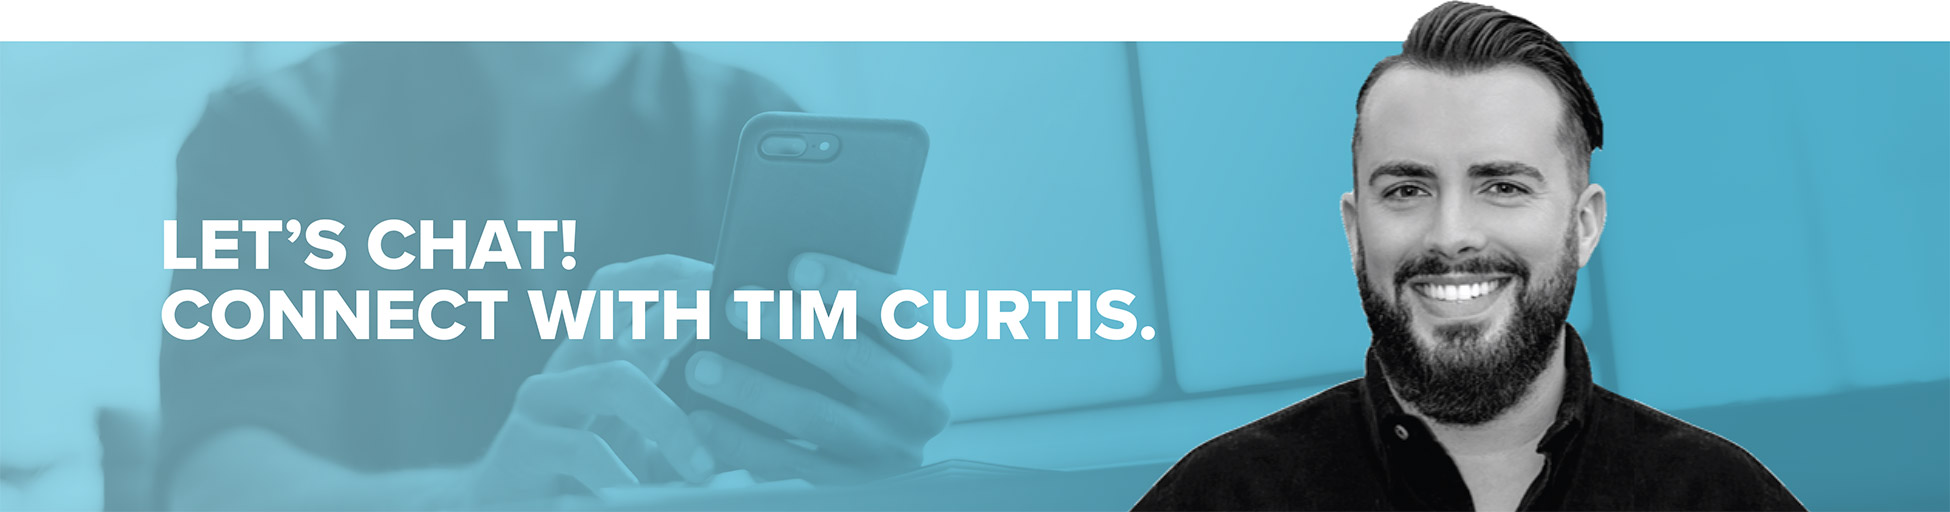 Let's Chat! Connect with Tim Curtis.